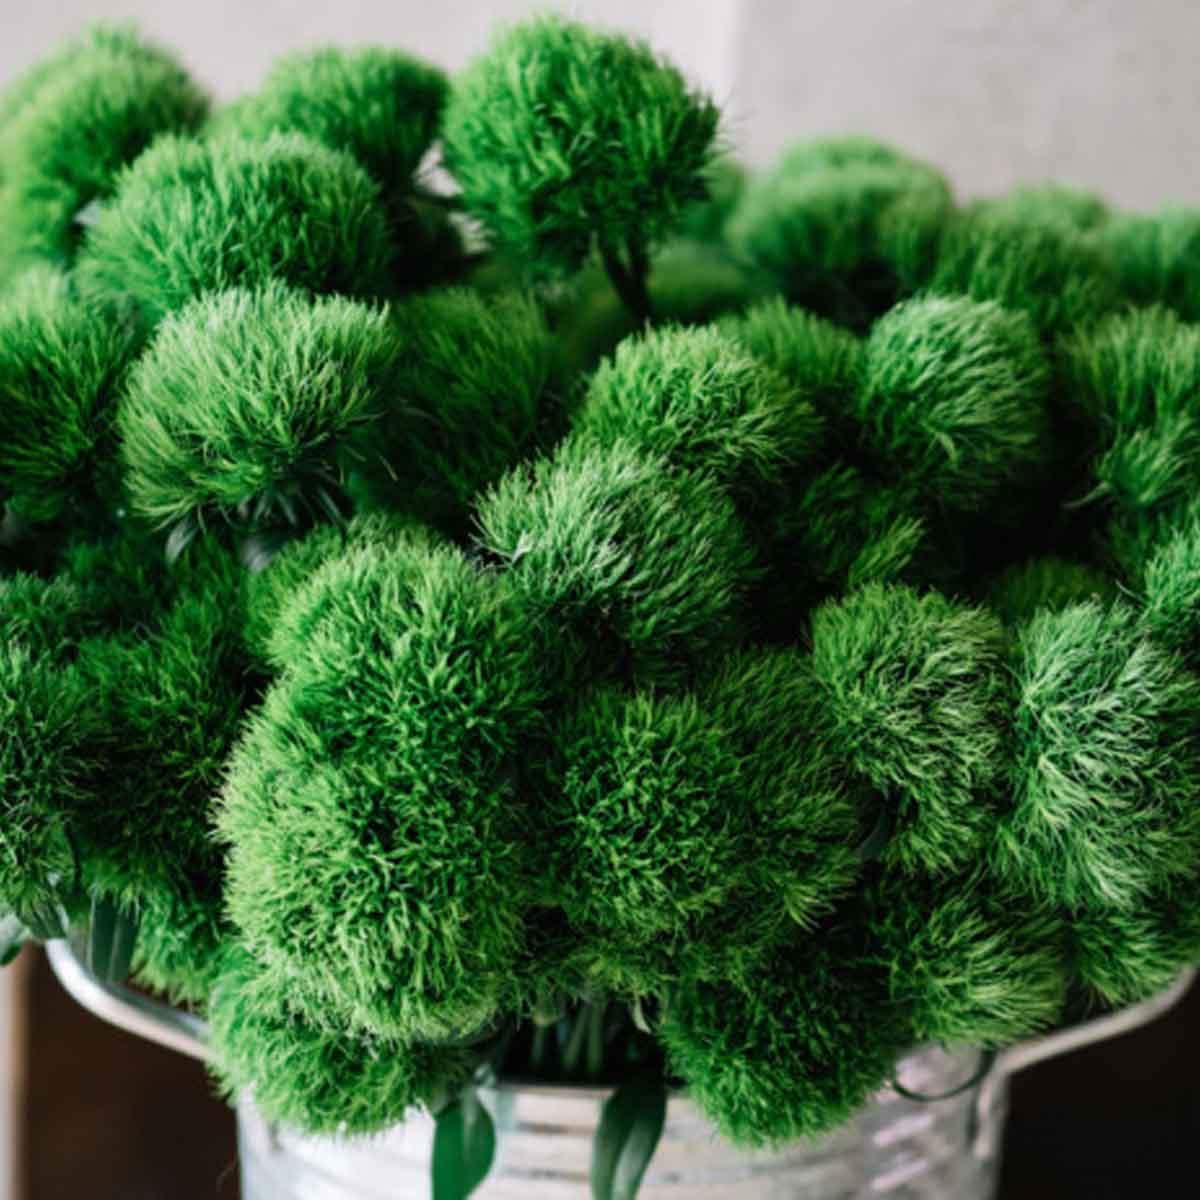 the-world-renowned-green-ball-dianthus-and-what-do-you-think-of-the-new-punky-ball-and-cocoa-ball-featured